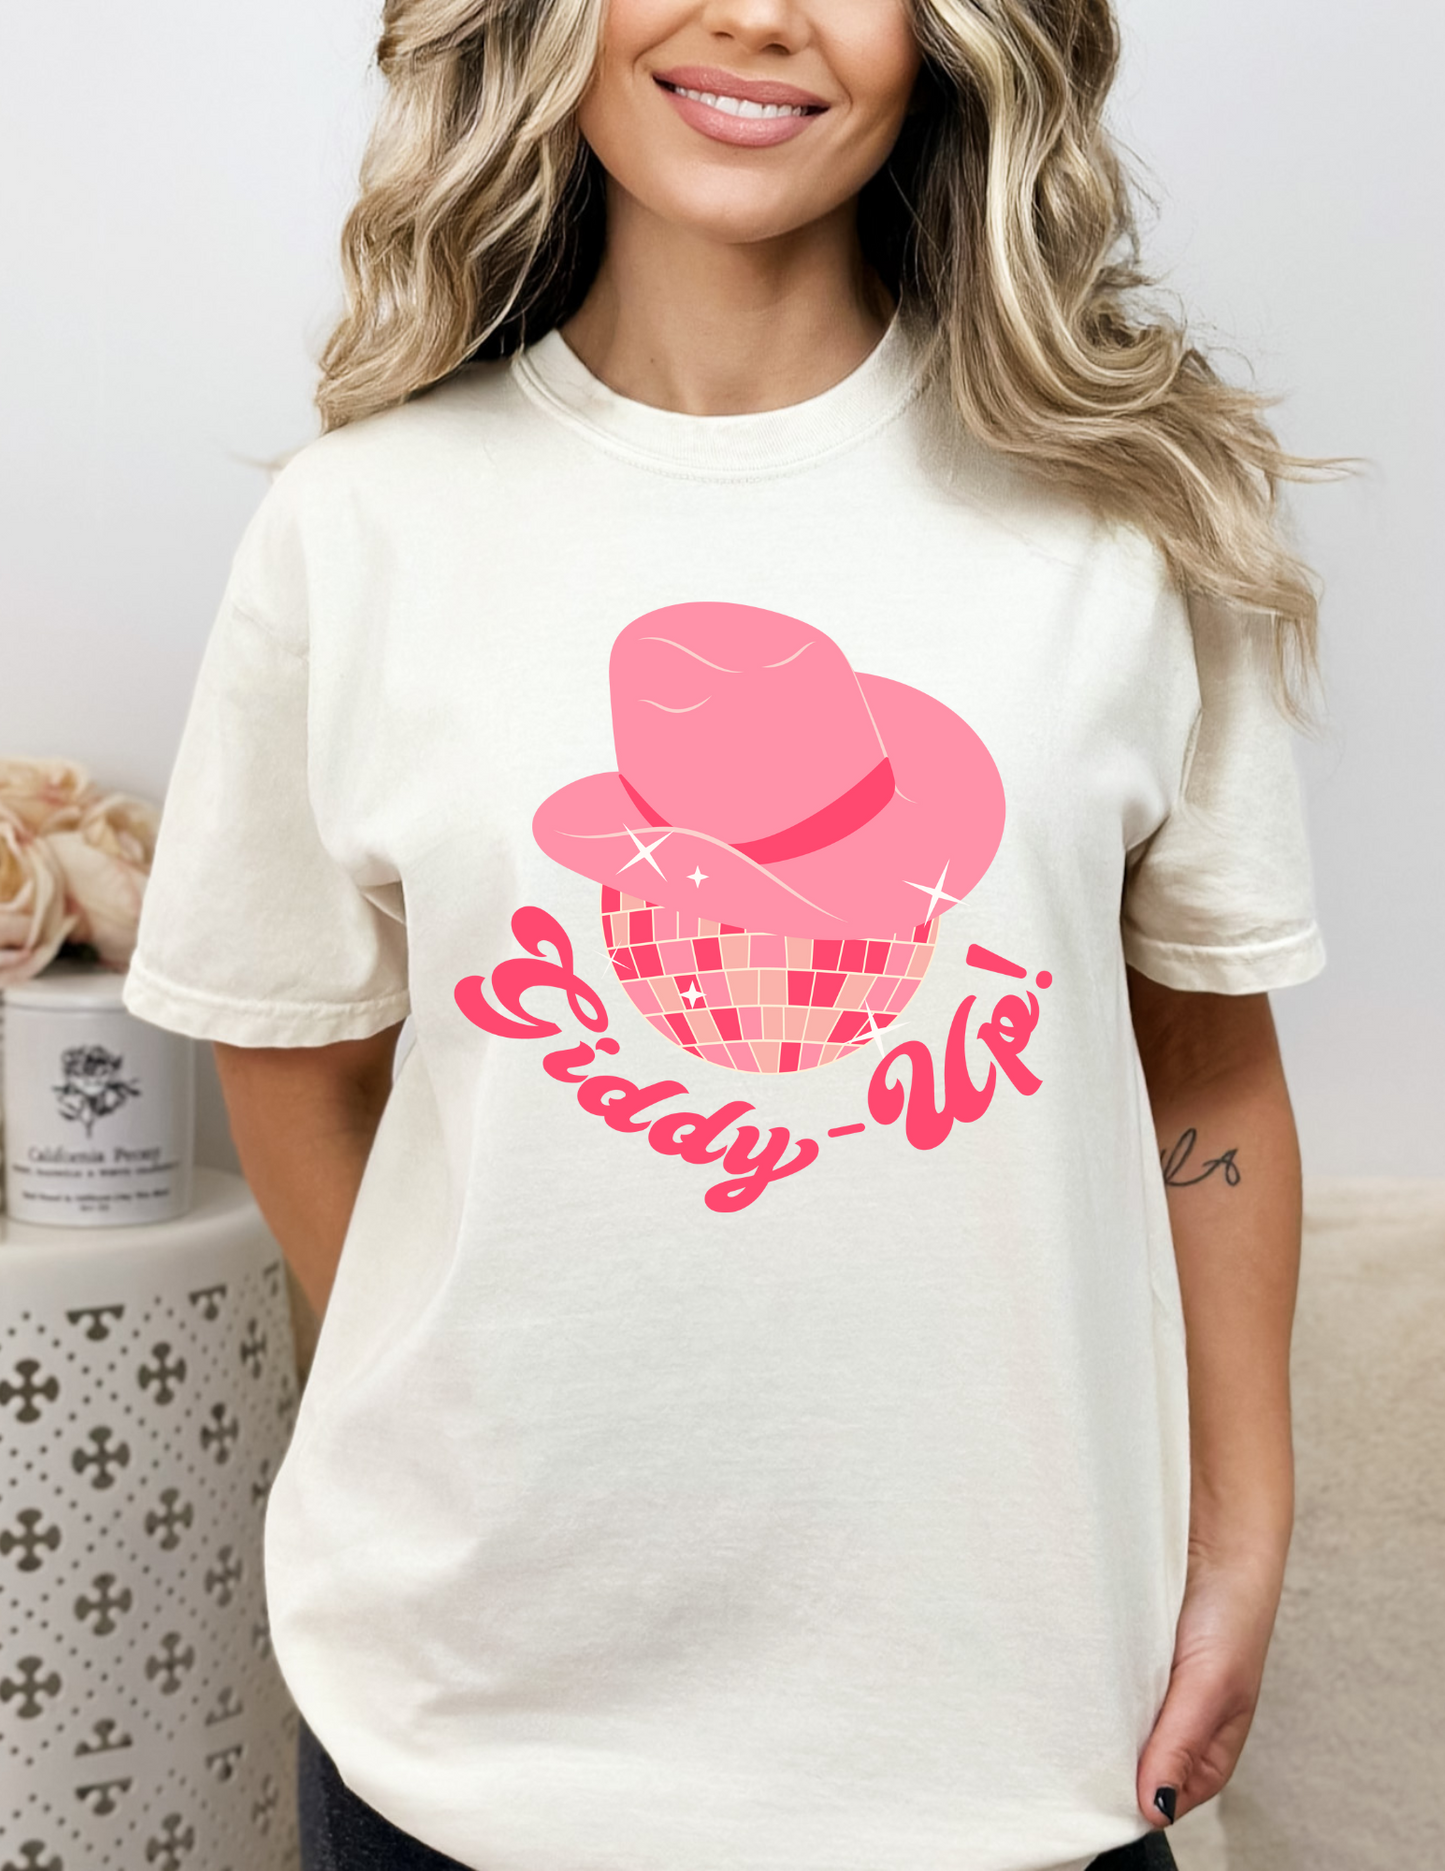 "Giddy Up" Graphic Tee